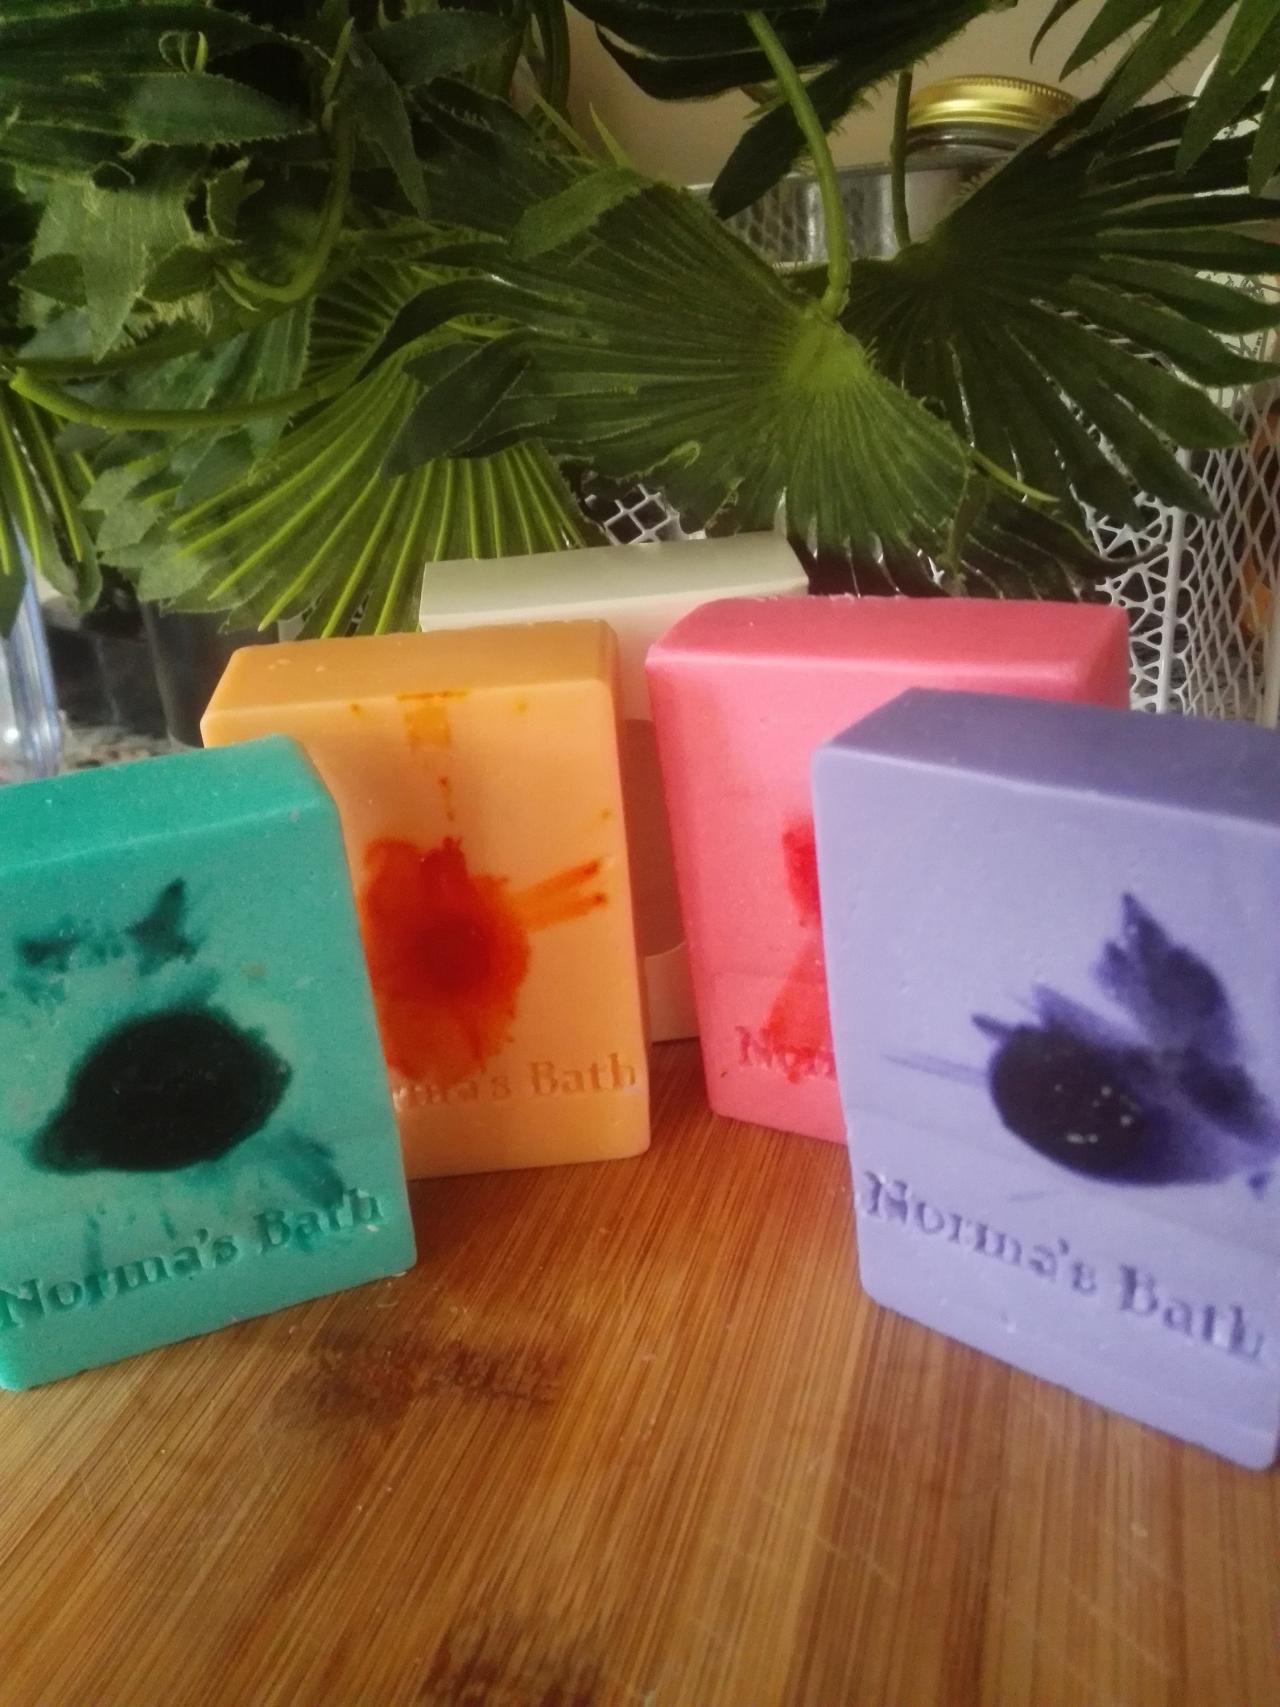 Soaps. Pack 4. Get One